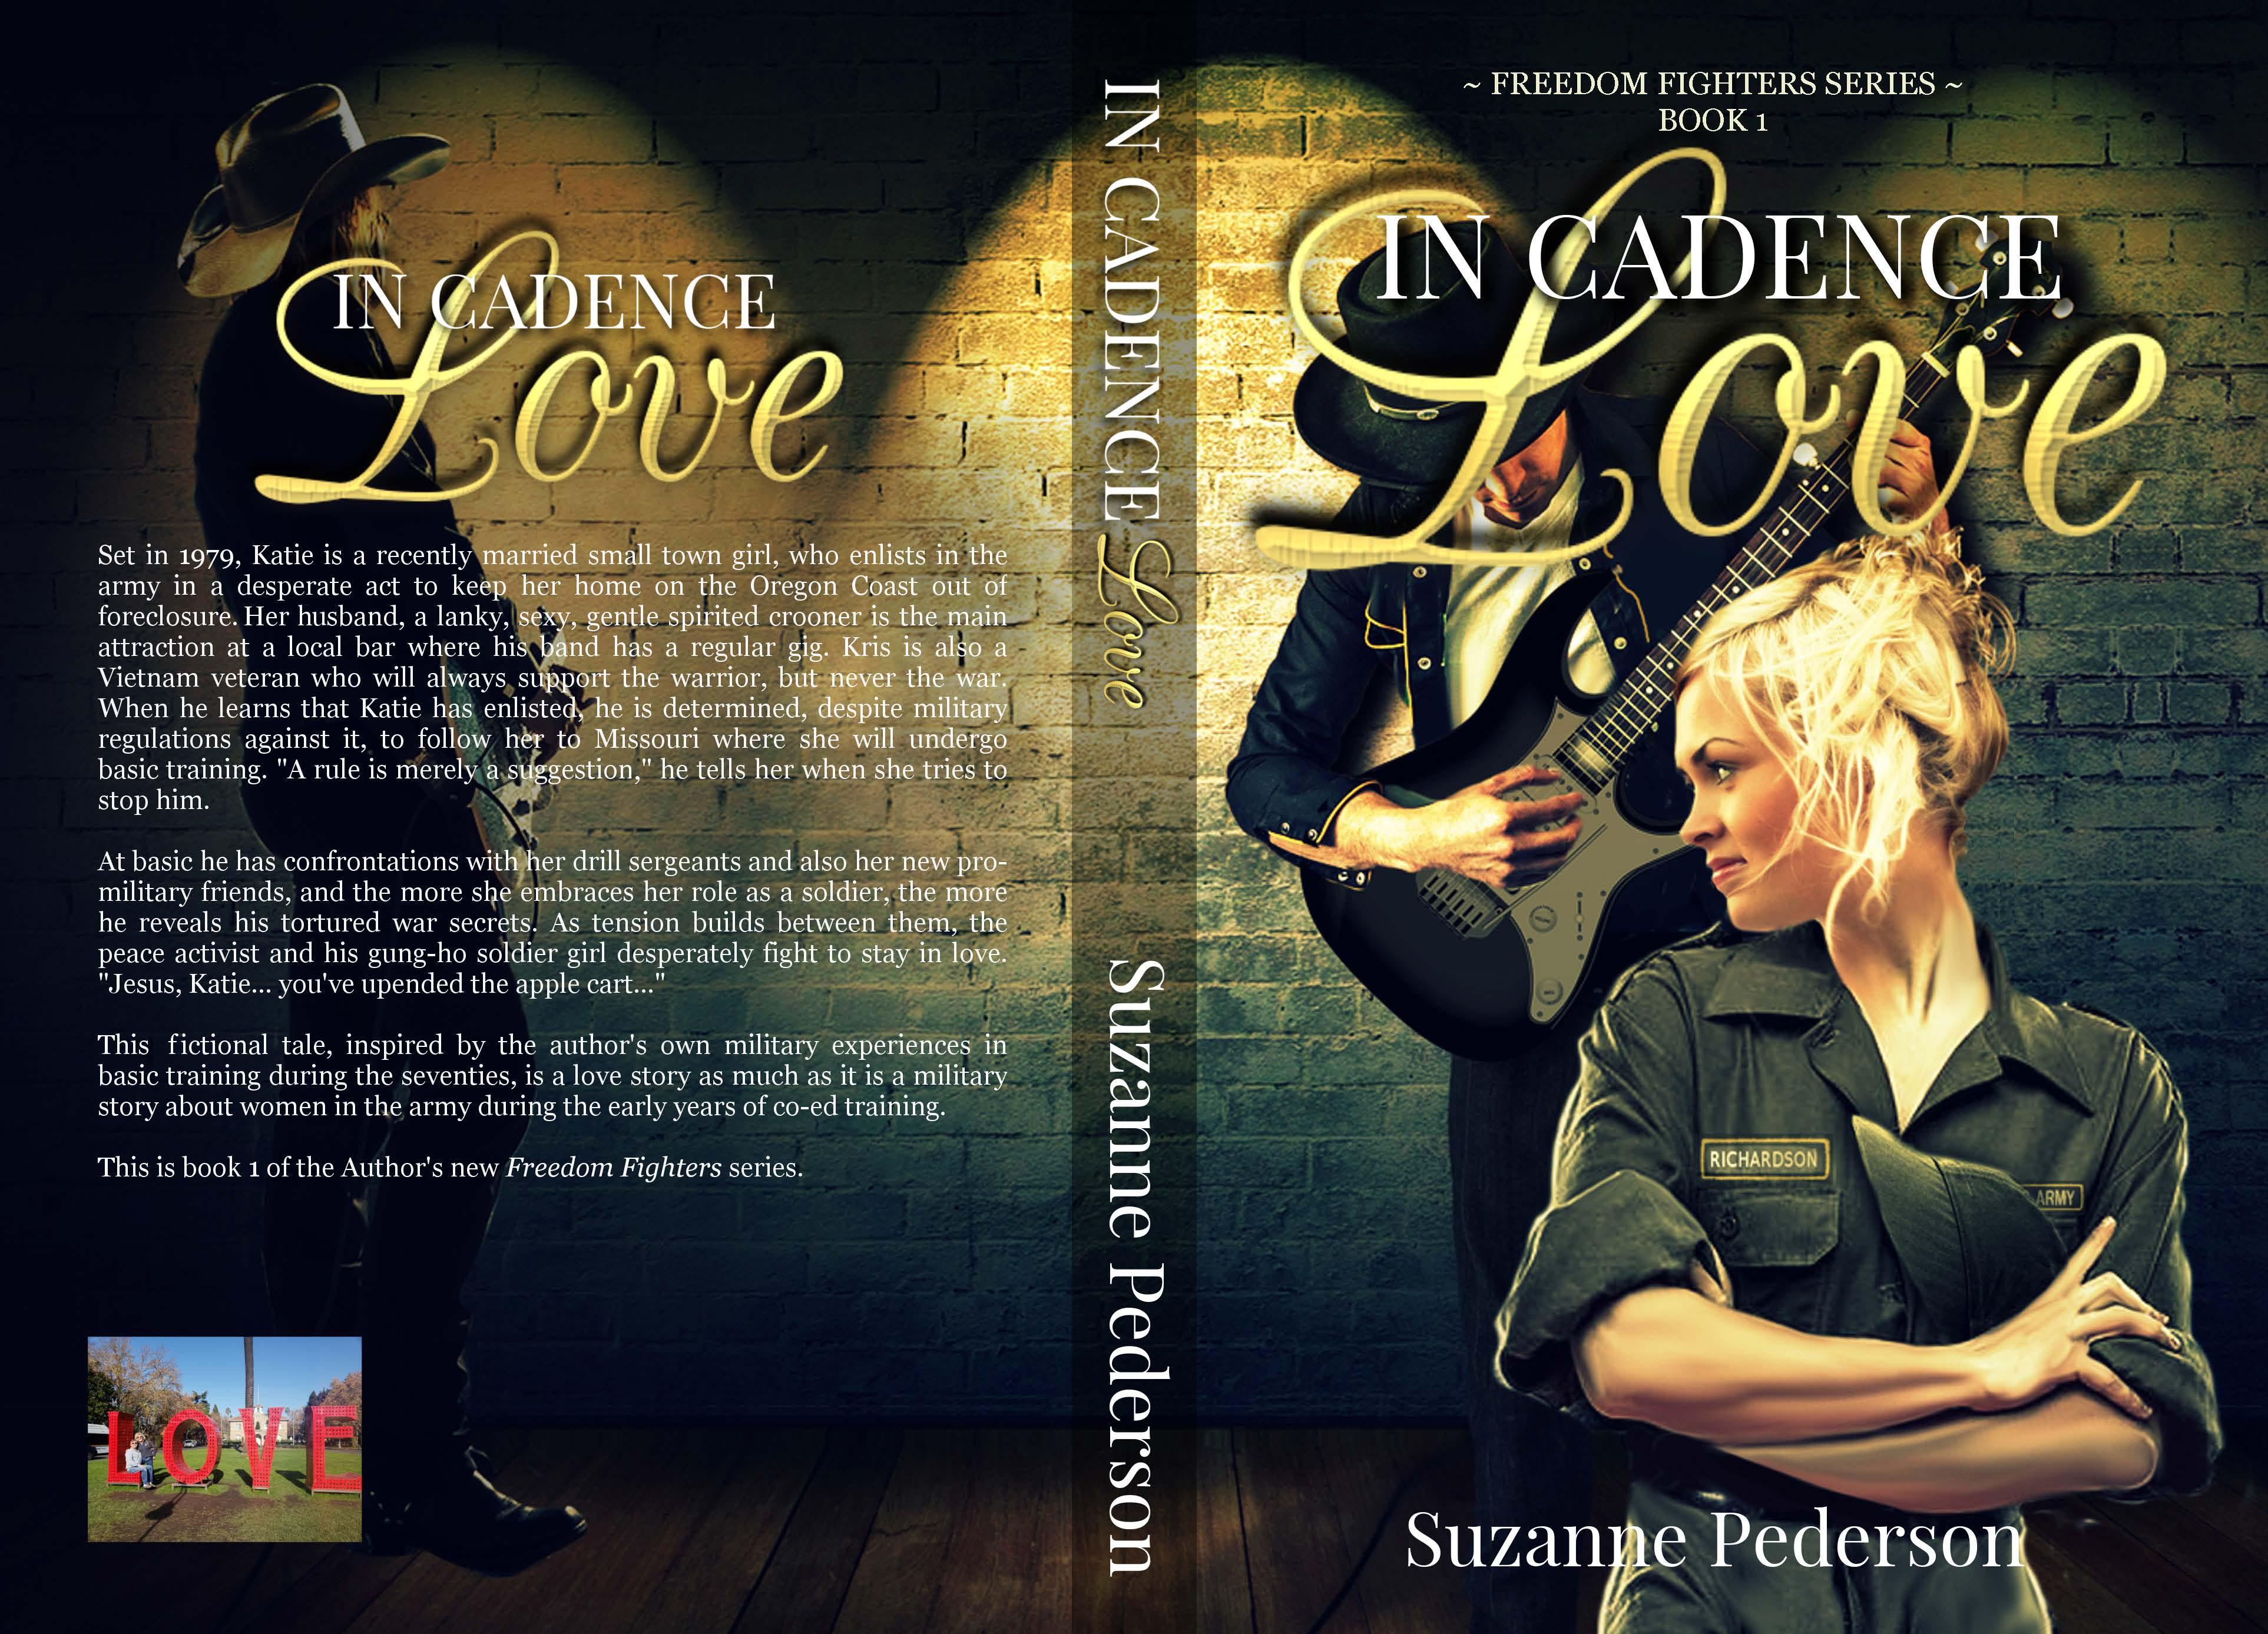 In Cadence Love - Book 1 in the Freedom Fighters series